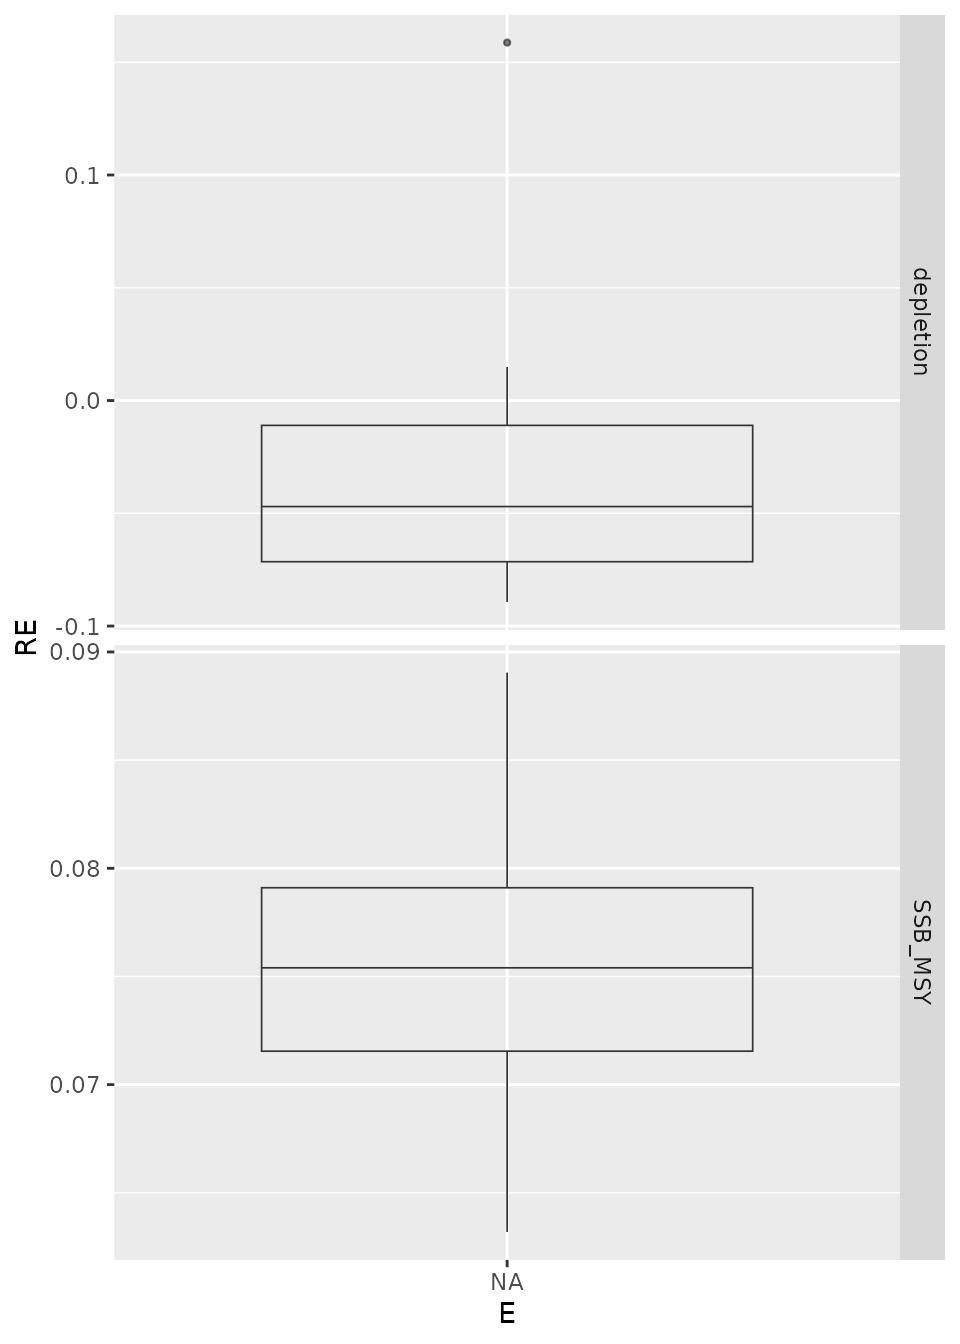 Box plots of the relative error (RE) for deterministic runs. $M$ is fixed at the true value from the OM (E100) or estimated (E101).